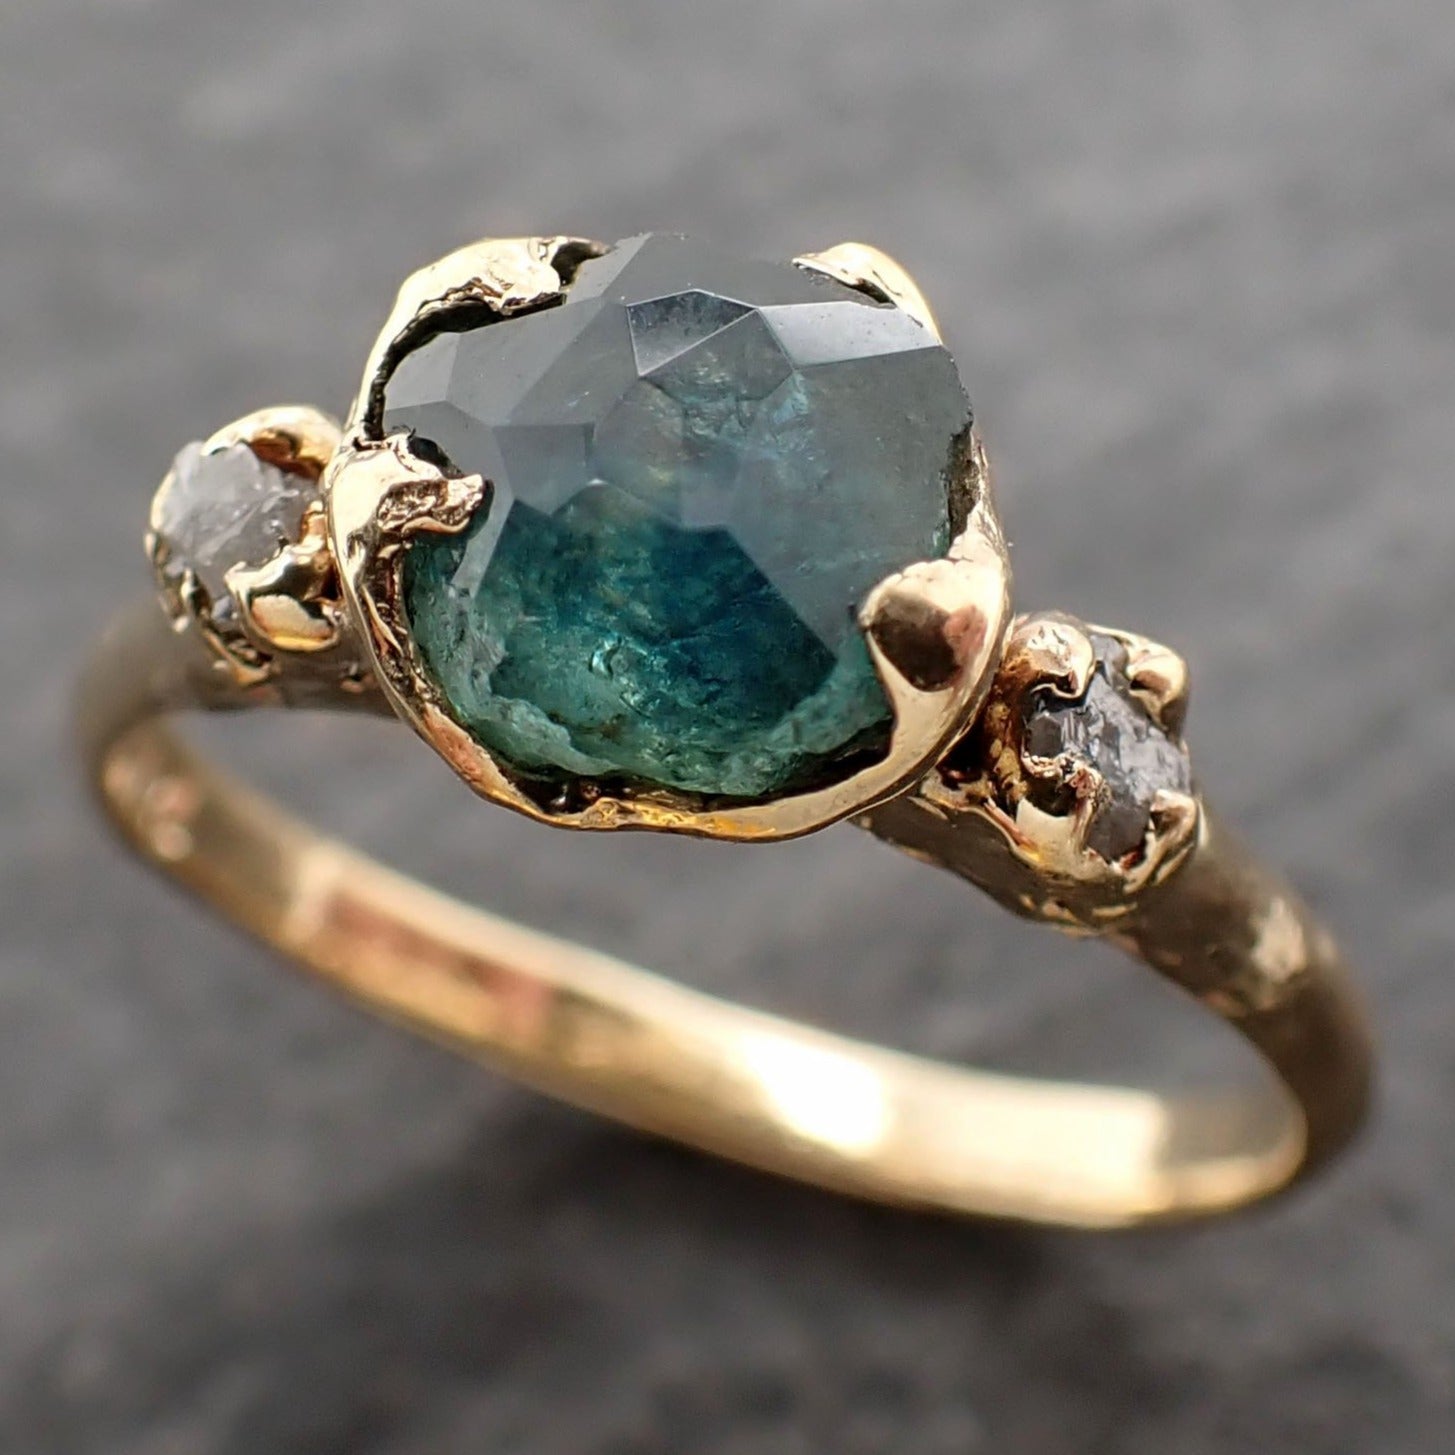 partially faceted montana blue green sapphire rough diamond 18k yellow gold engagement wedding gemstone multi stone ring 2571 Alternative Engagement